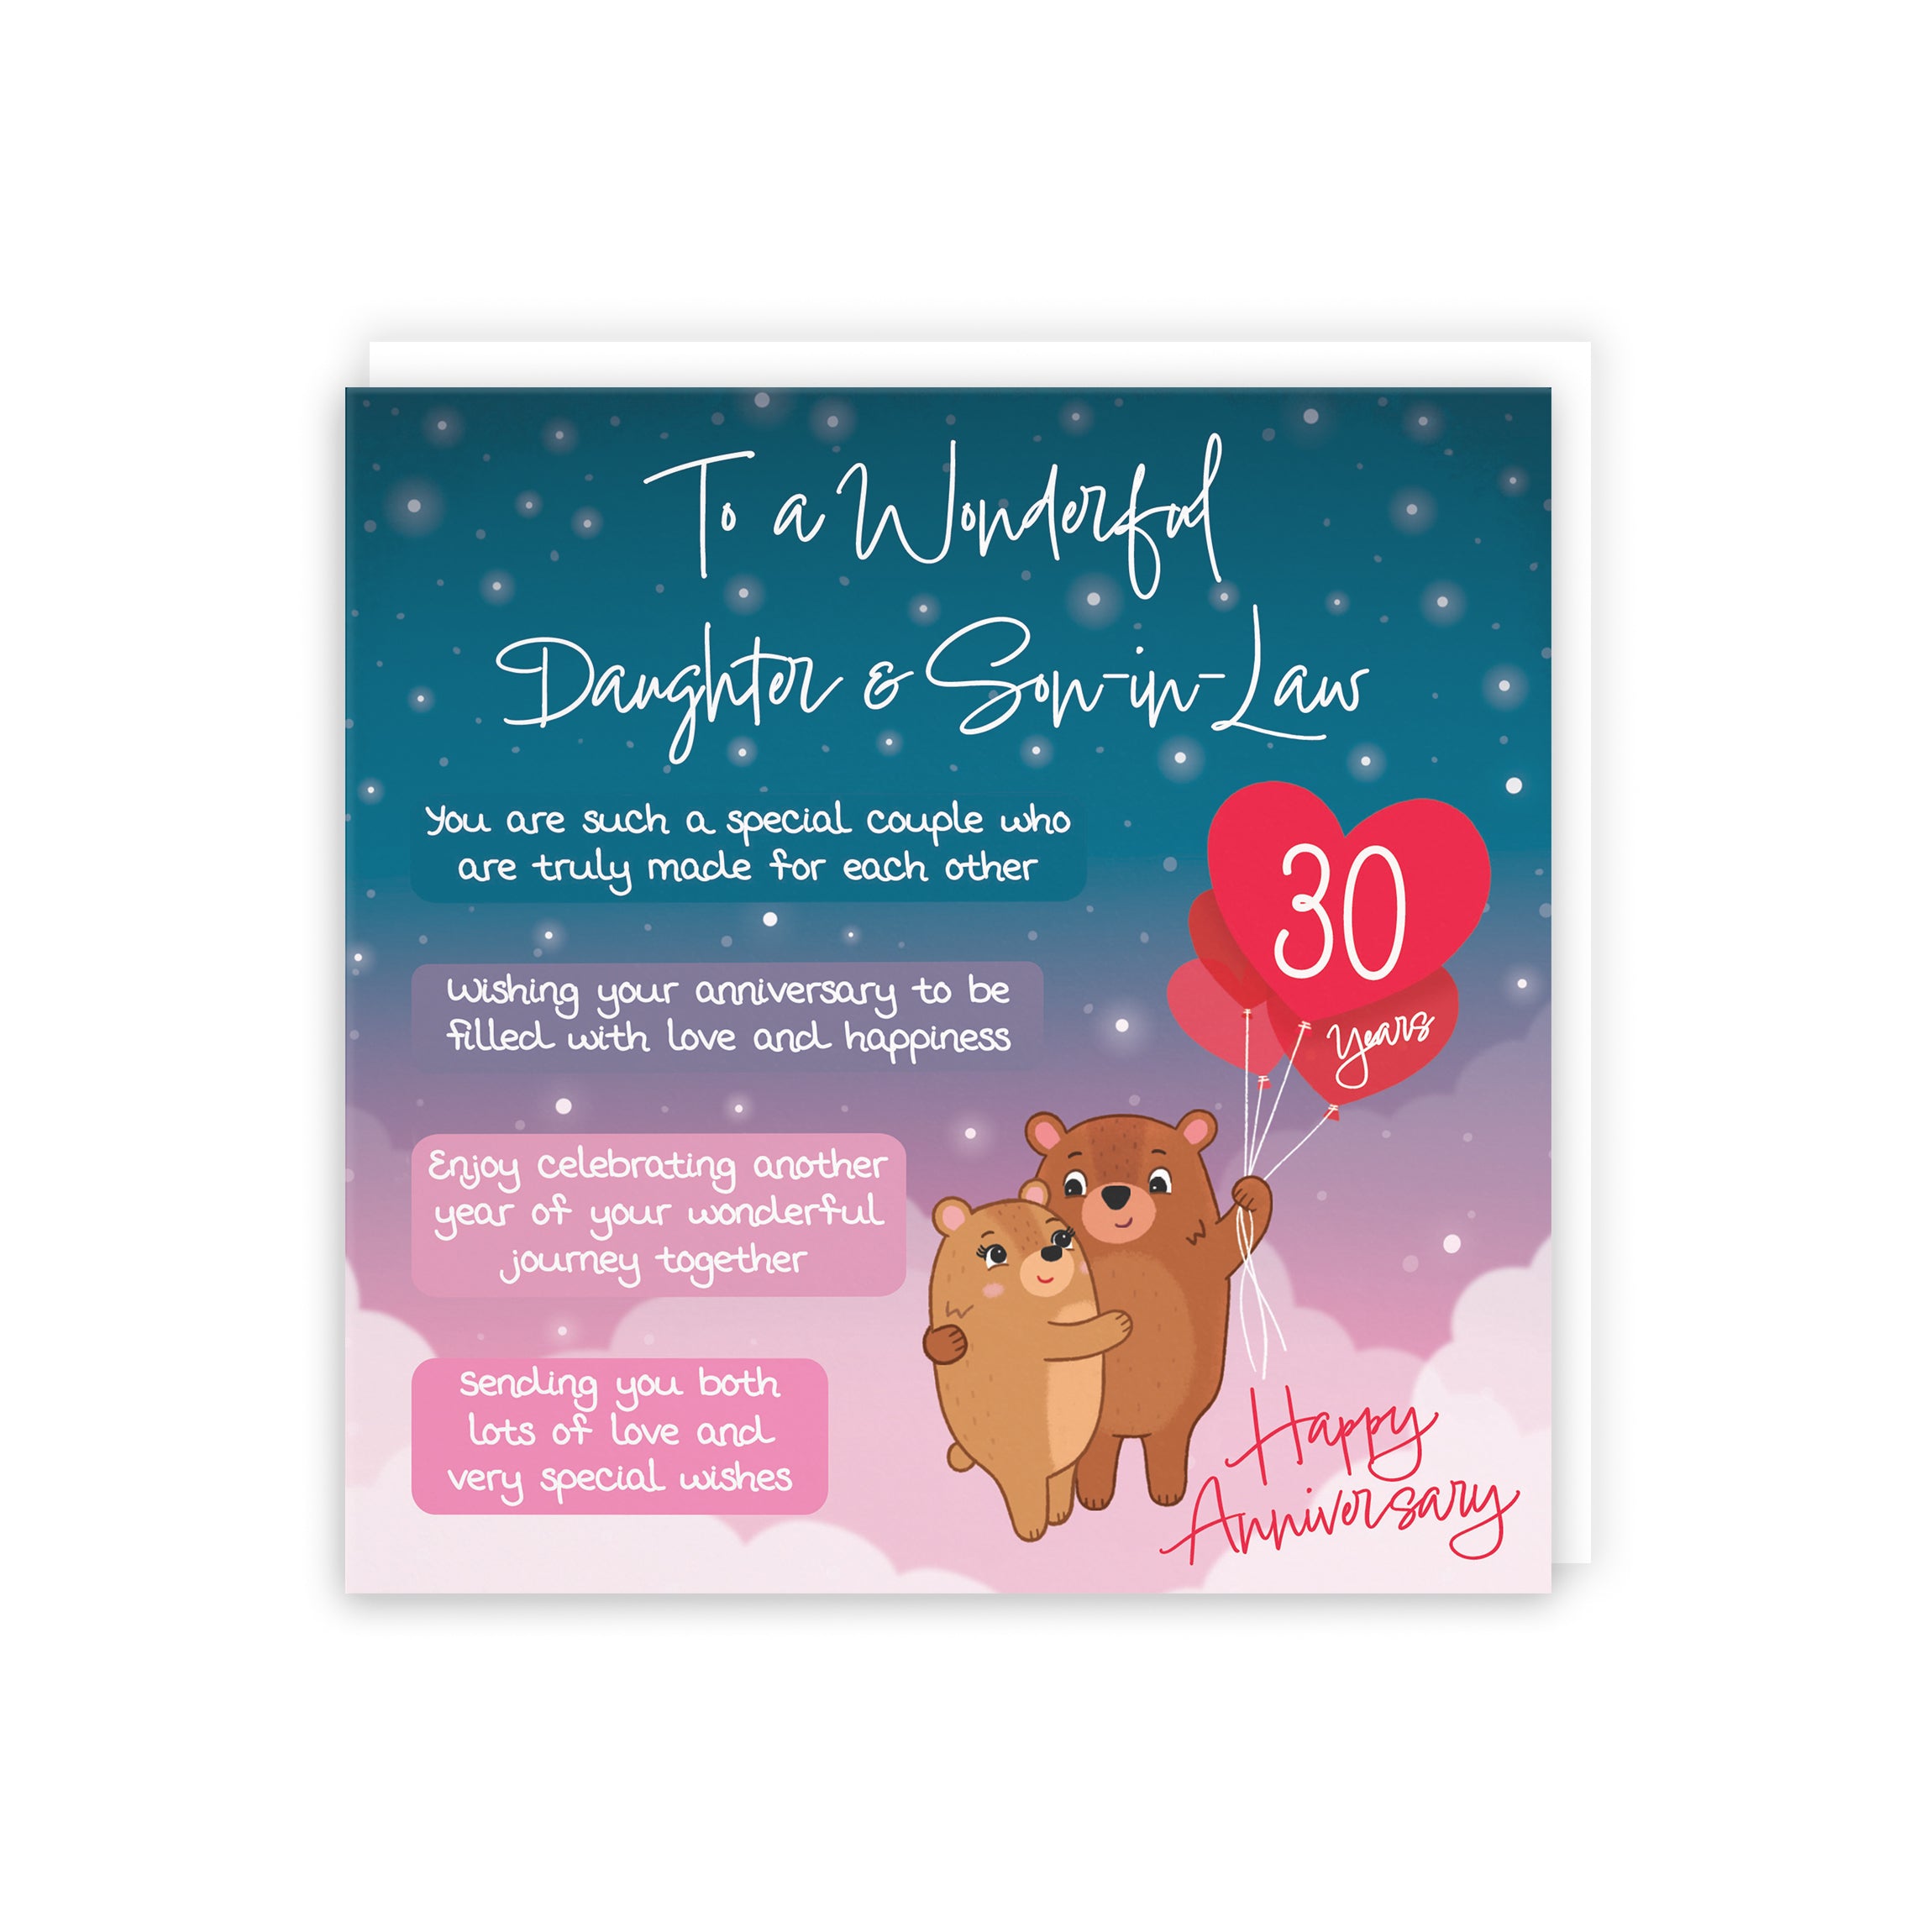 Daughter And Son In Law 30th Anniversary Card Starry Night Cute Bears